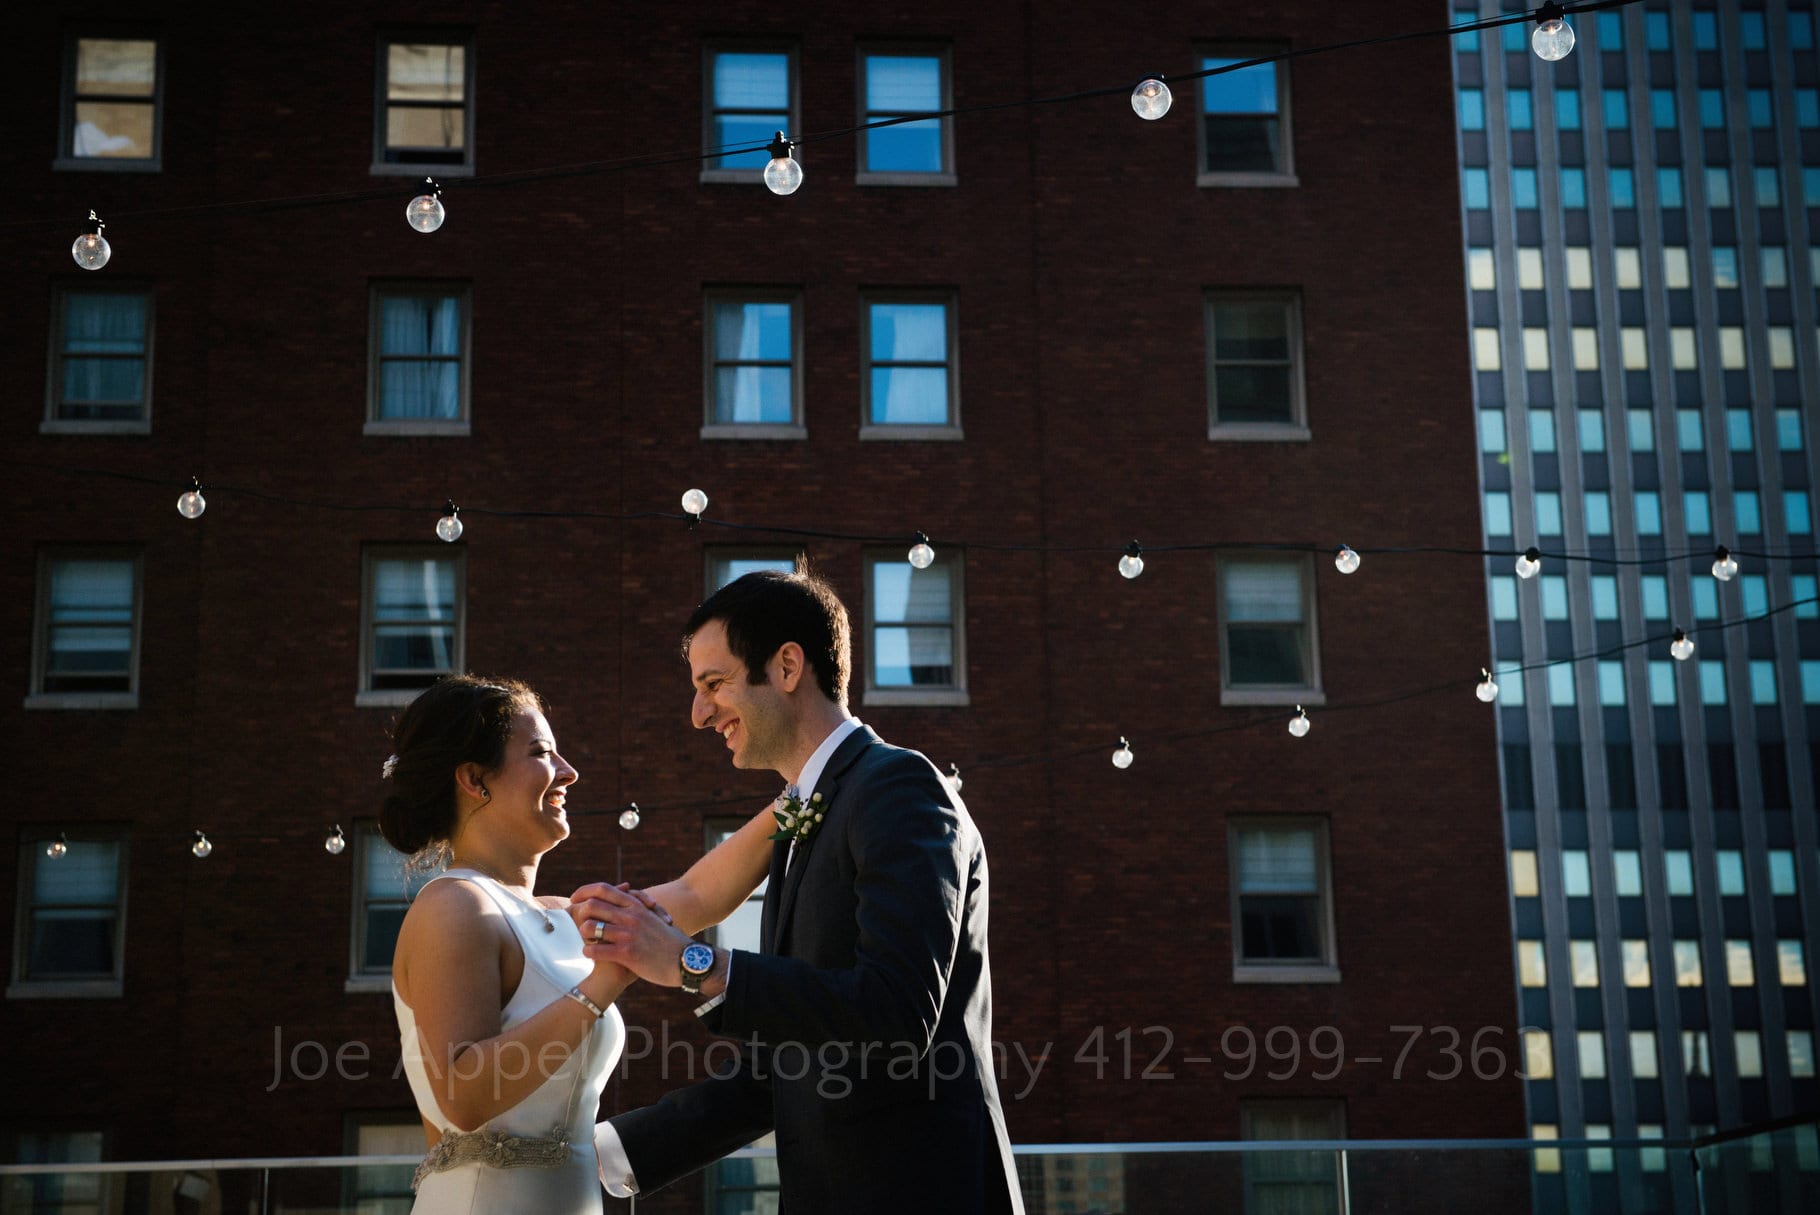 A bride and groom are rimmed in sunlight as they practice their first dance on the roof of the Hotel Monaco.